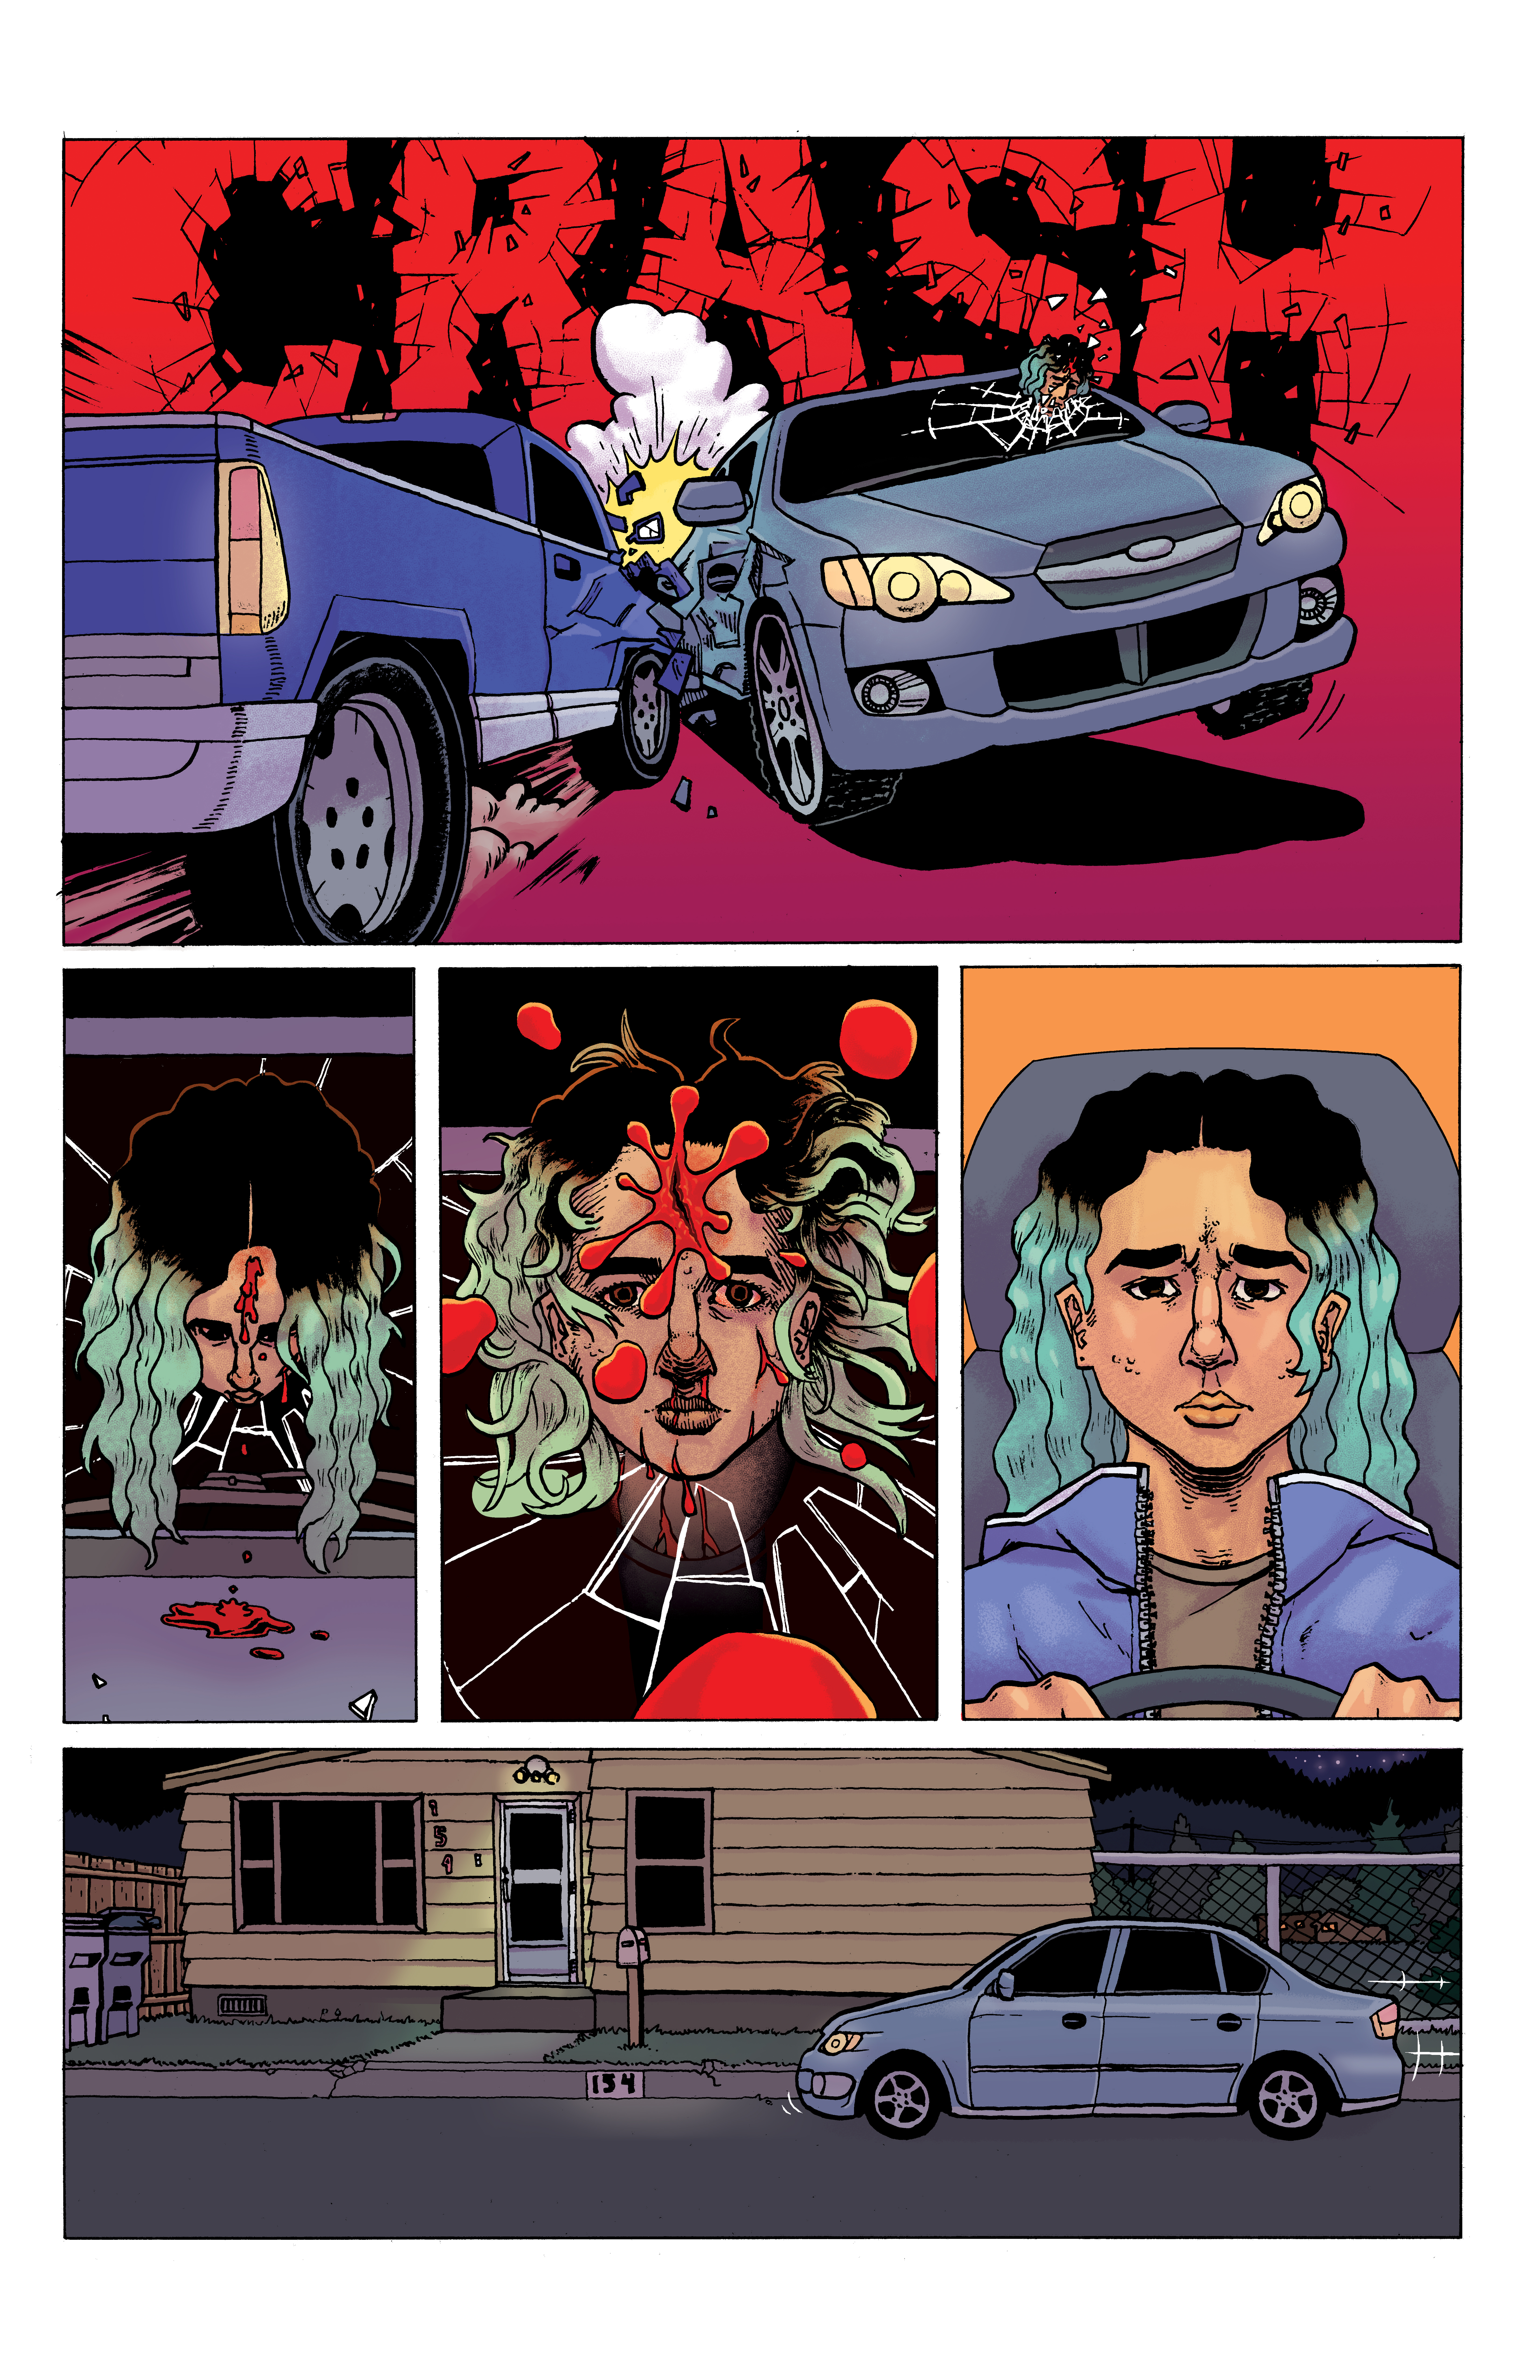 A color comics page depicting a five panel sequence of a car and truck colliding, and the teen girl driving the car smashing her head through the windsheild and dying. The next panel shows her alive and pulling up next to a house.